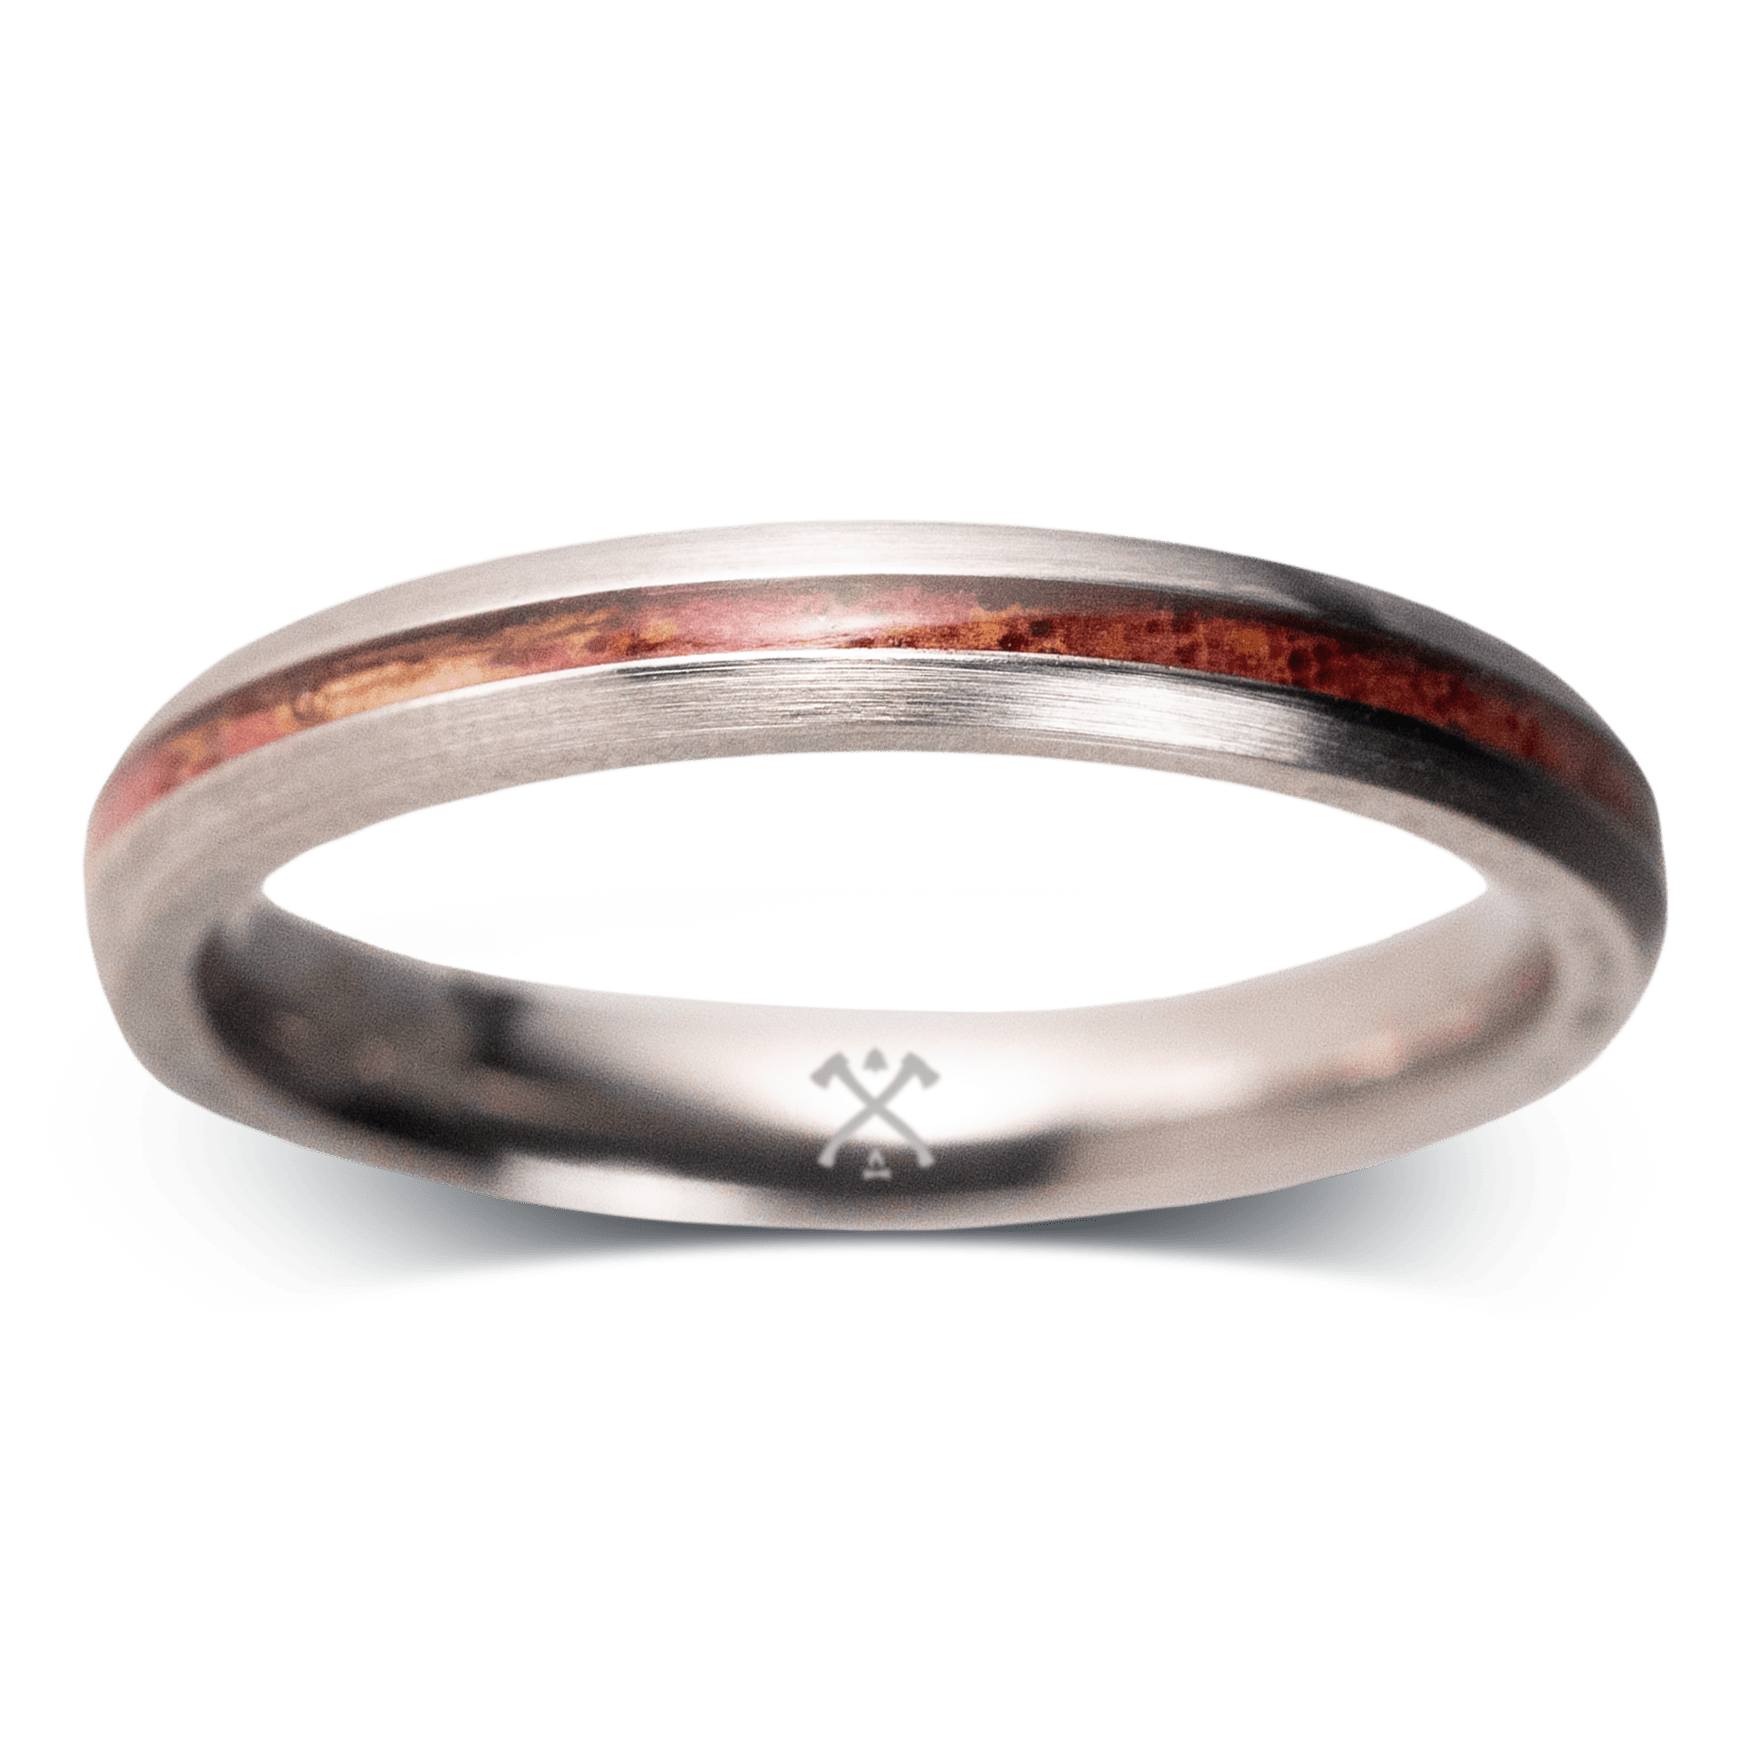 The Isabelle - Men's Wedding Rings - Manly Bands